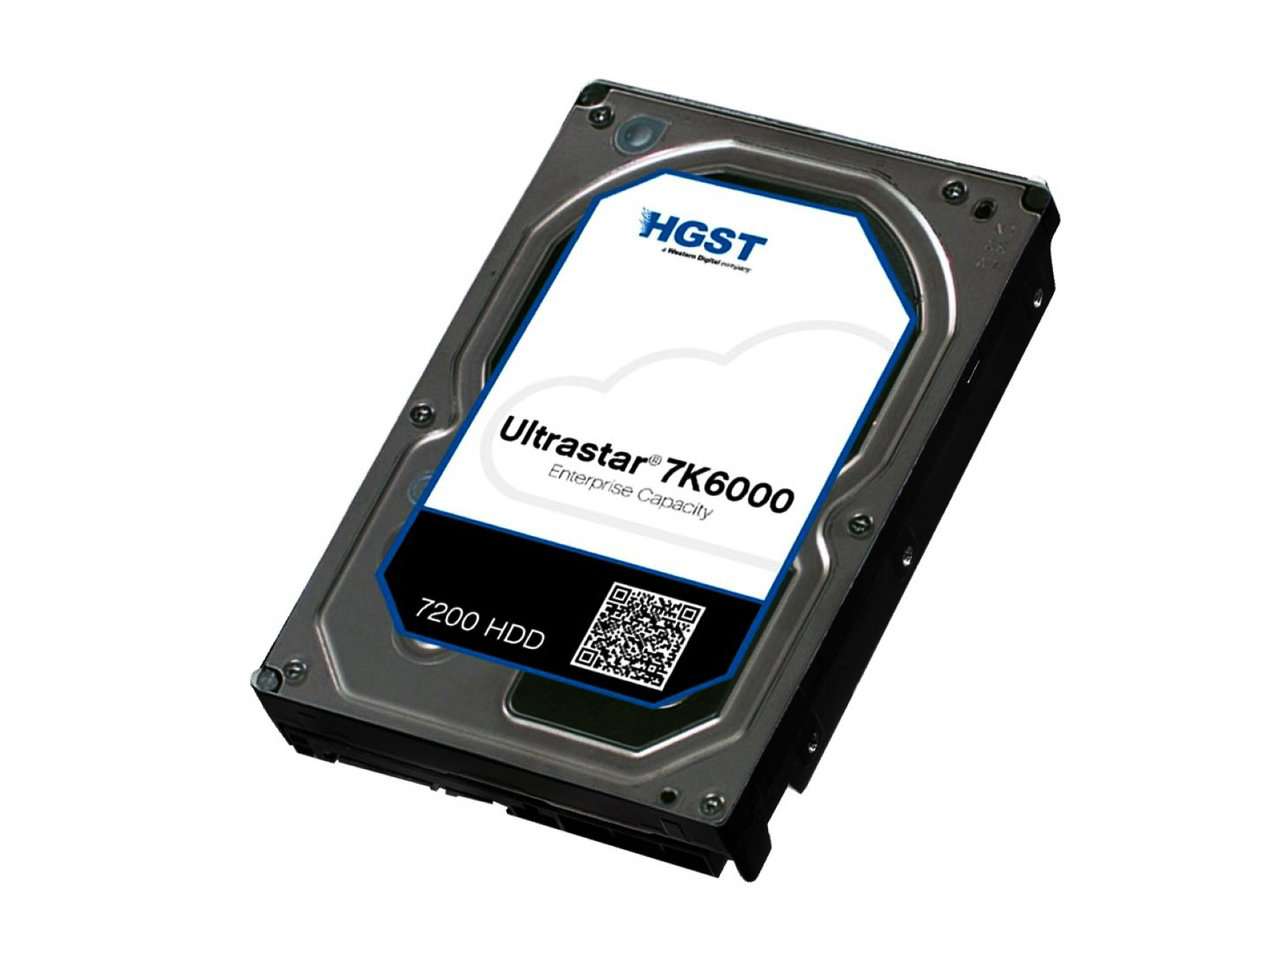 HGST Ultrastar 7K6000 0F22829  HUS726020AL5215 2TB 7.2K RPM SAS 12Gb/s 512e 128MB Cache 3.5" TCG FIPS Manufacturer Recertified HDD